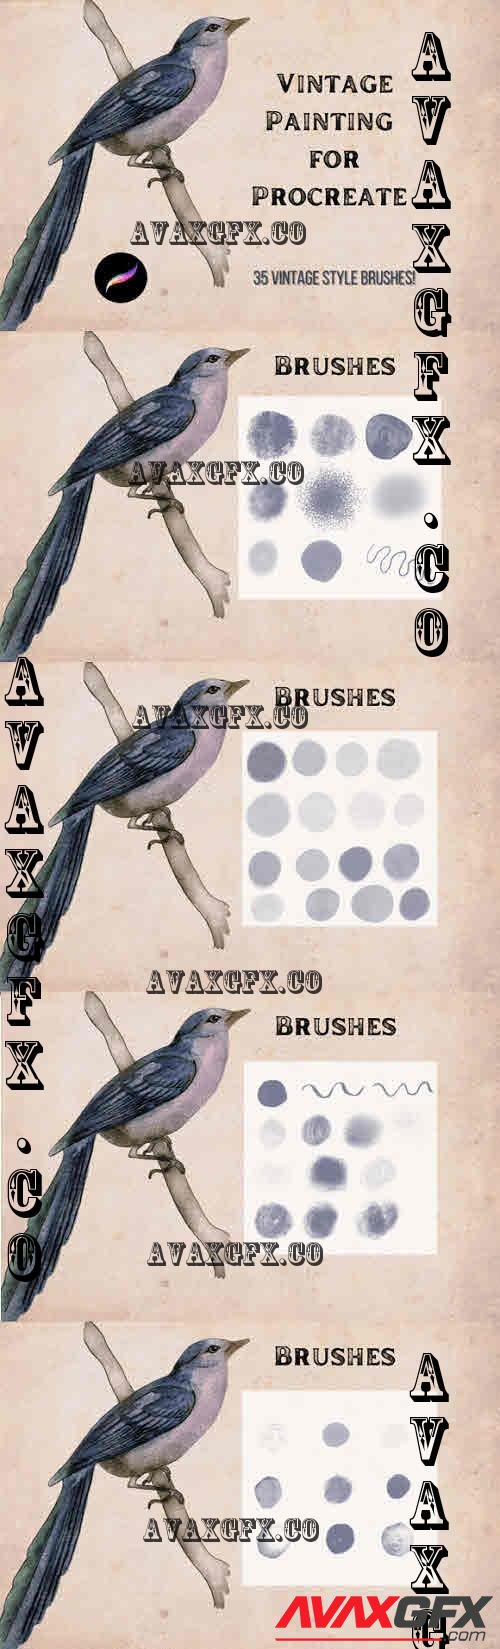 Vintage Painting Brushes for Procreate